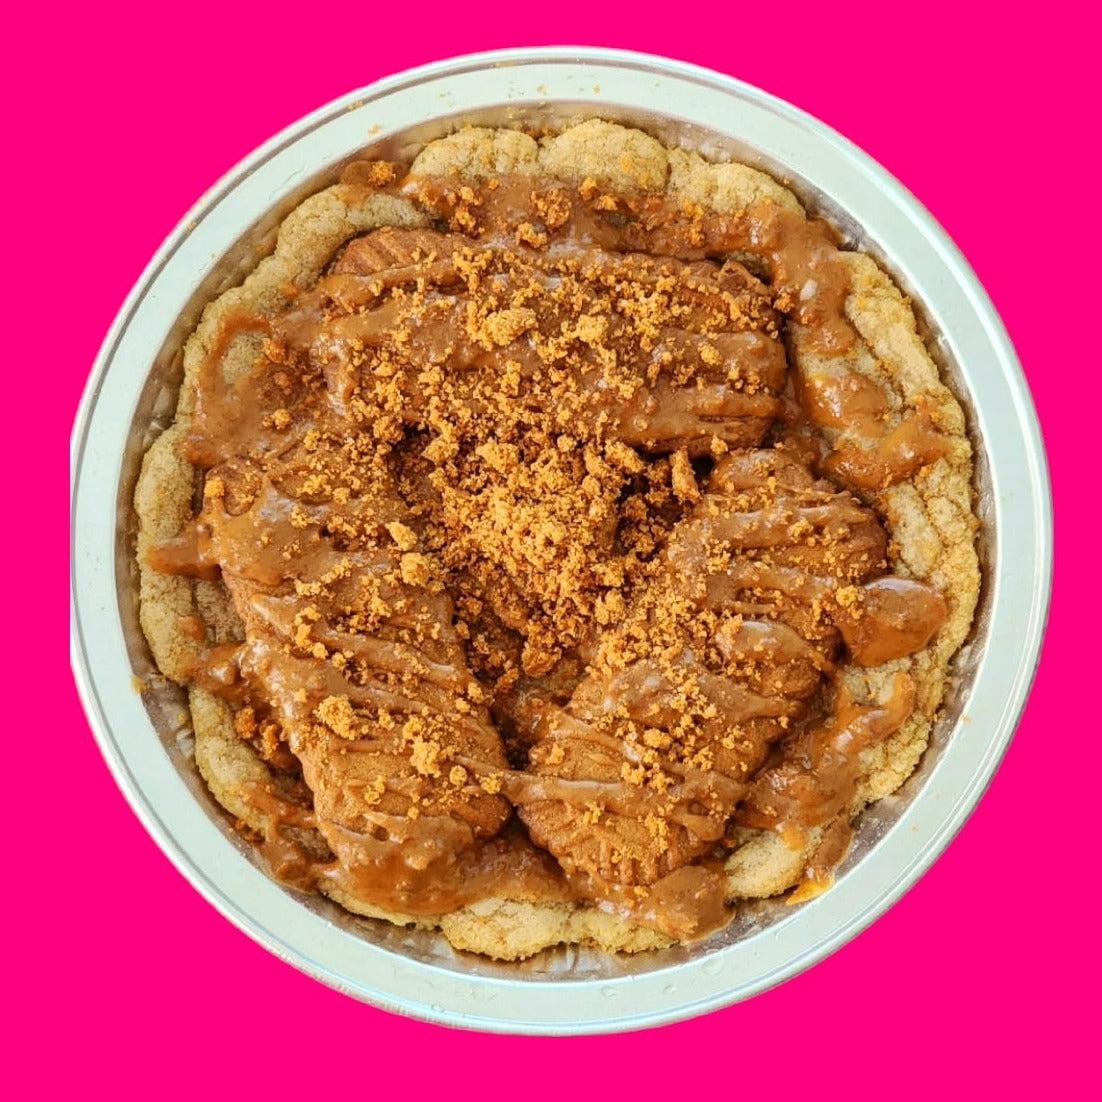 Biscoff stuffed skillet cookie . Skillet baked cookie from Skillet cookie company.Order online skillet baked cookies Canada wide delivery. Toronto cookies